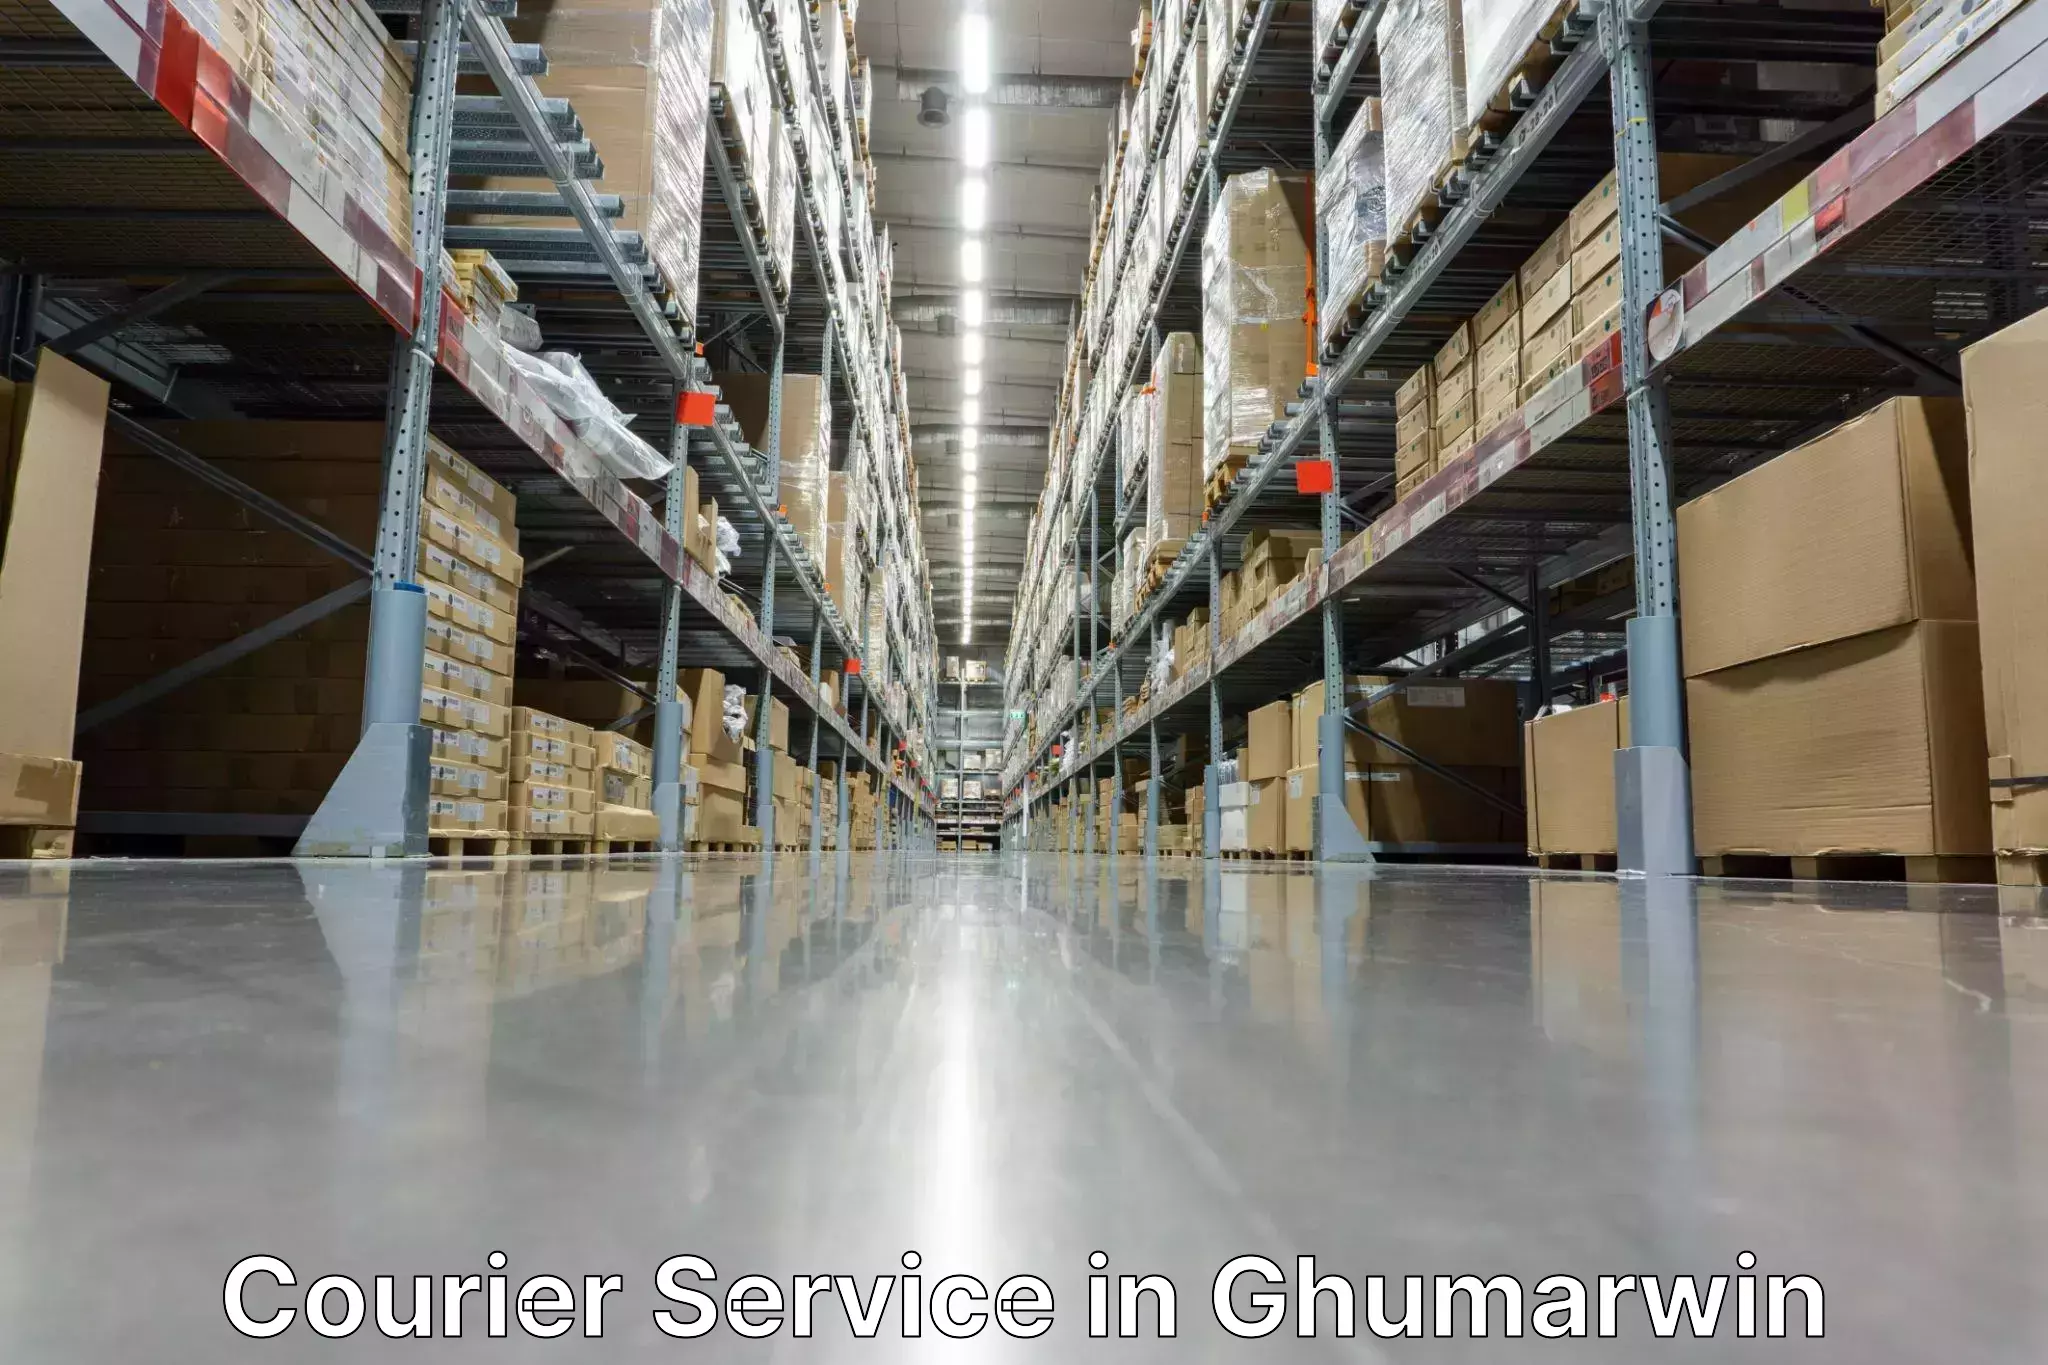 State-of-the-art courier technology in Ghumarwin